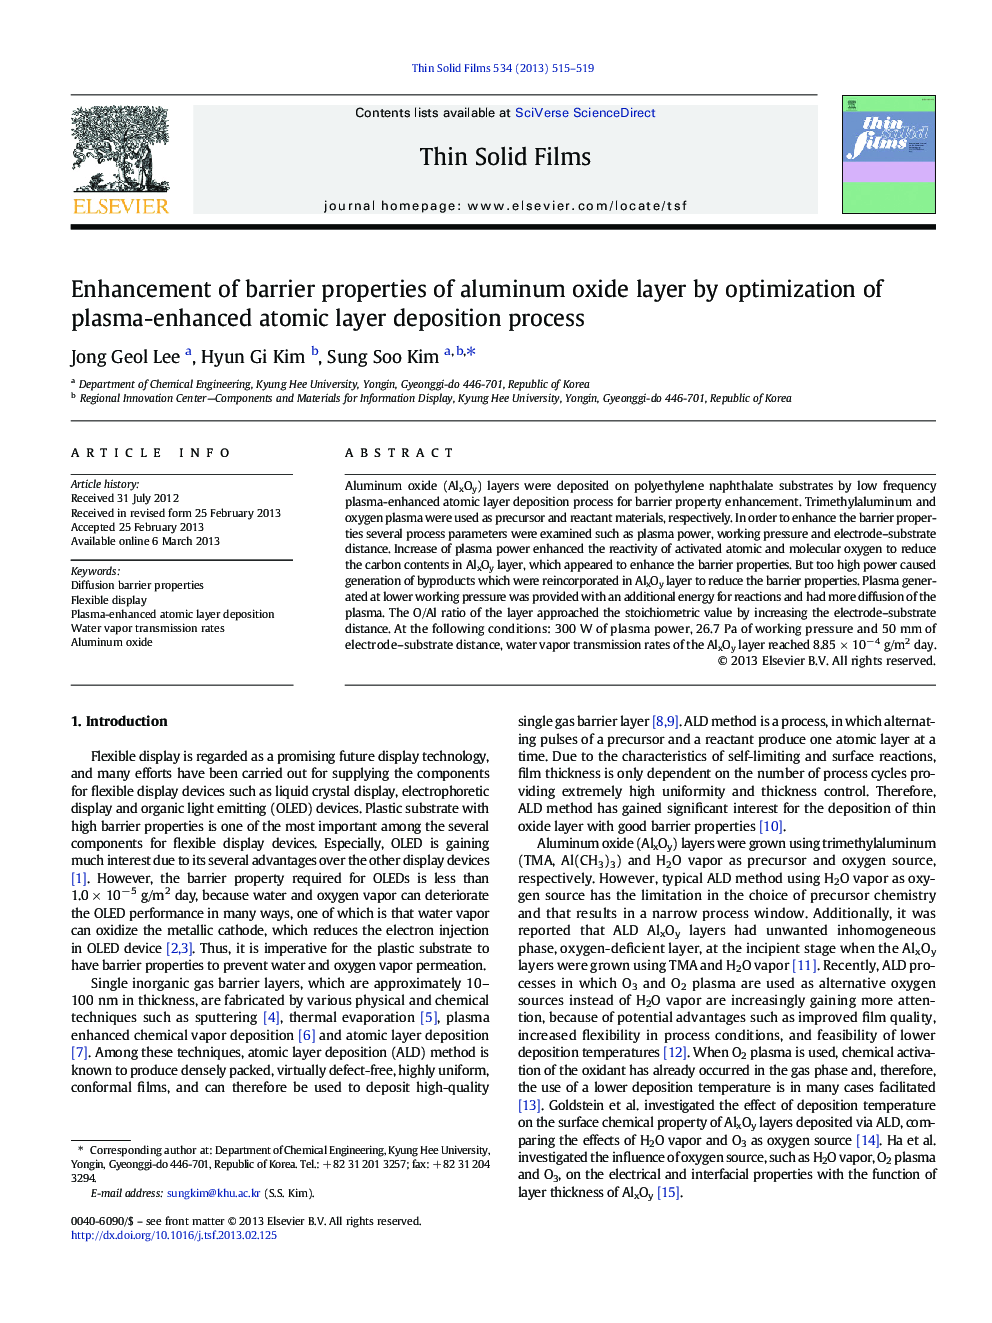 Enhancement of barrier properties of aluminum oxide layer by optimization of plasma-enhanced atomic layer deposition process